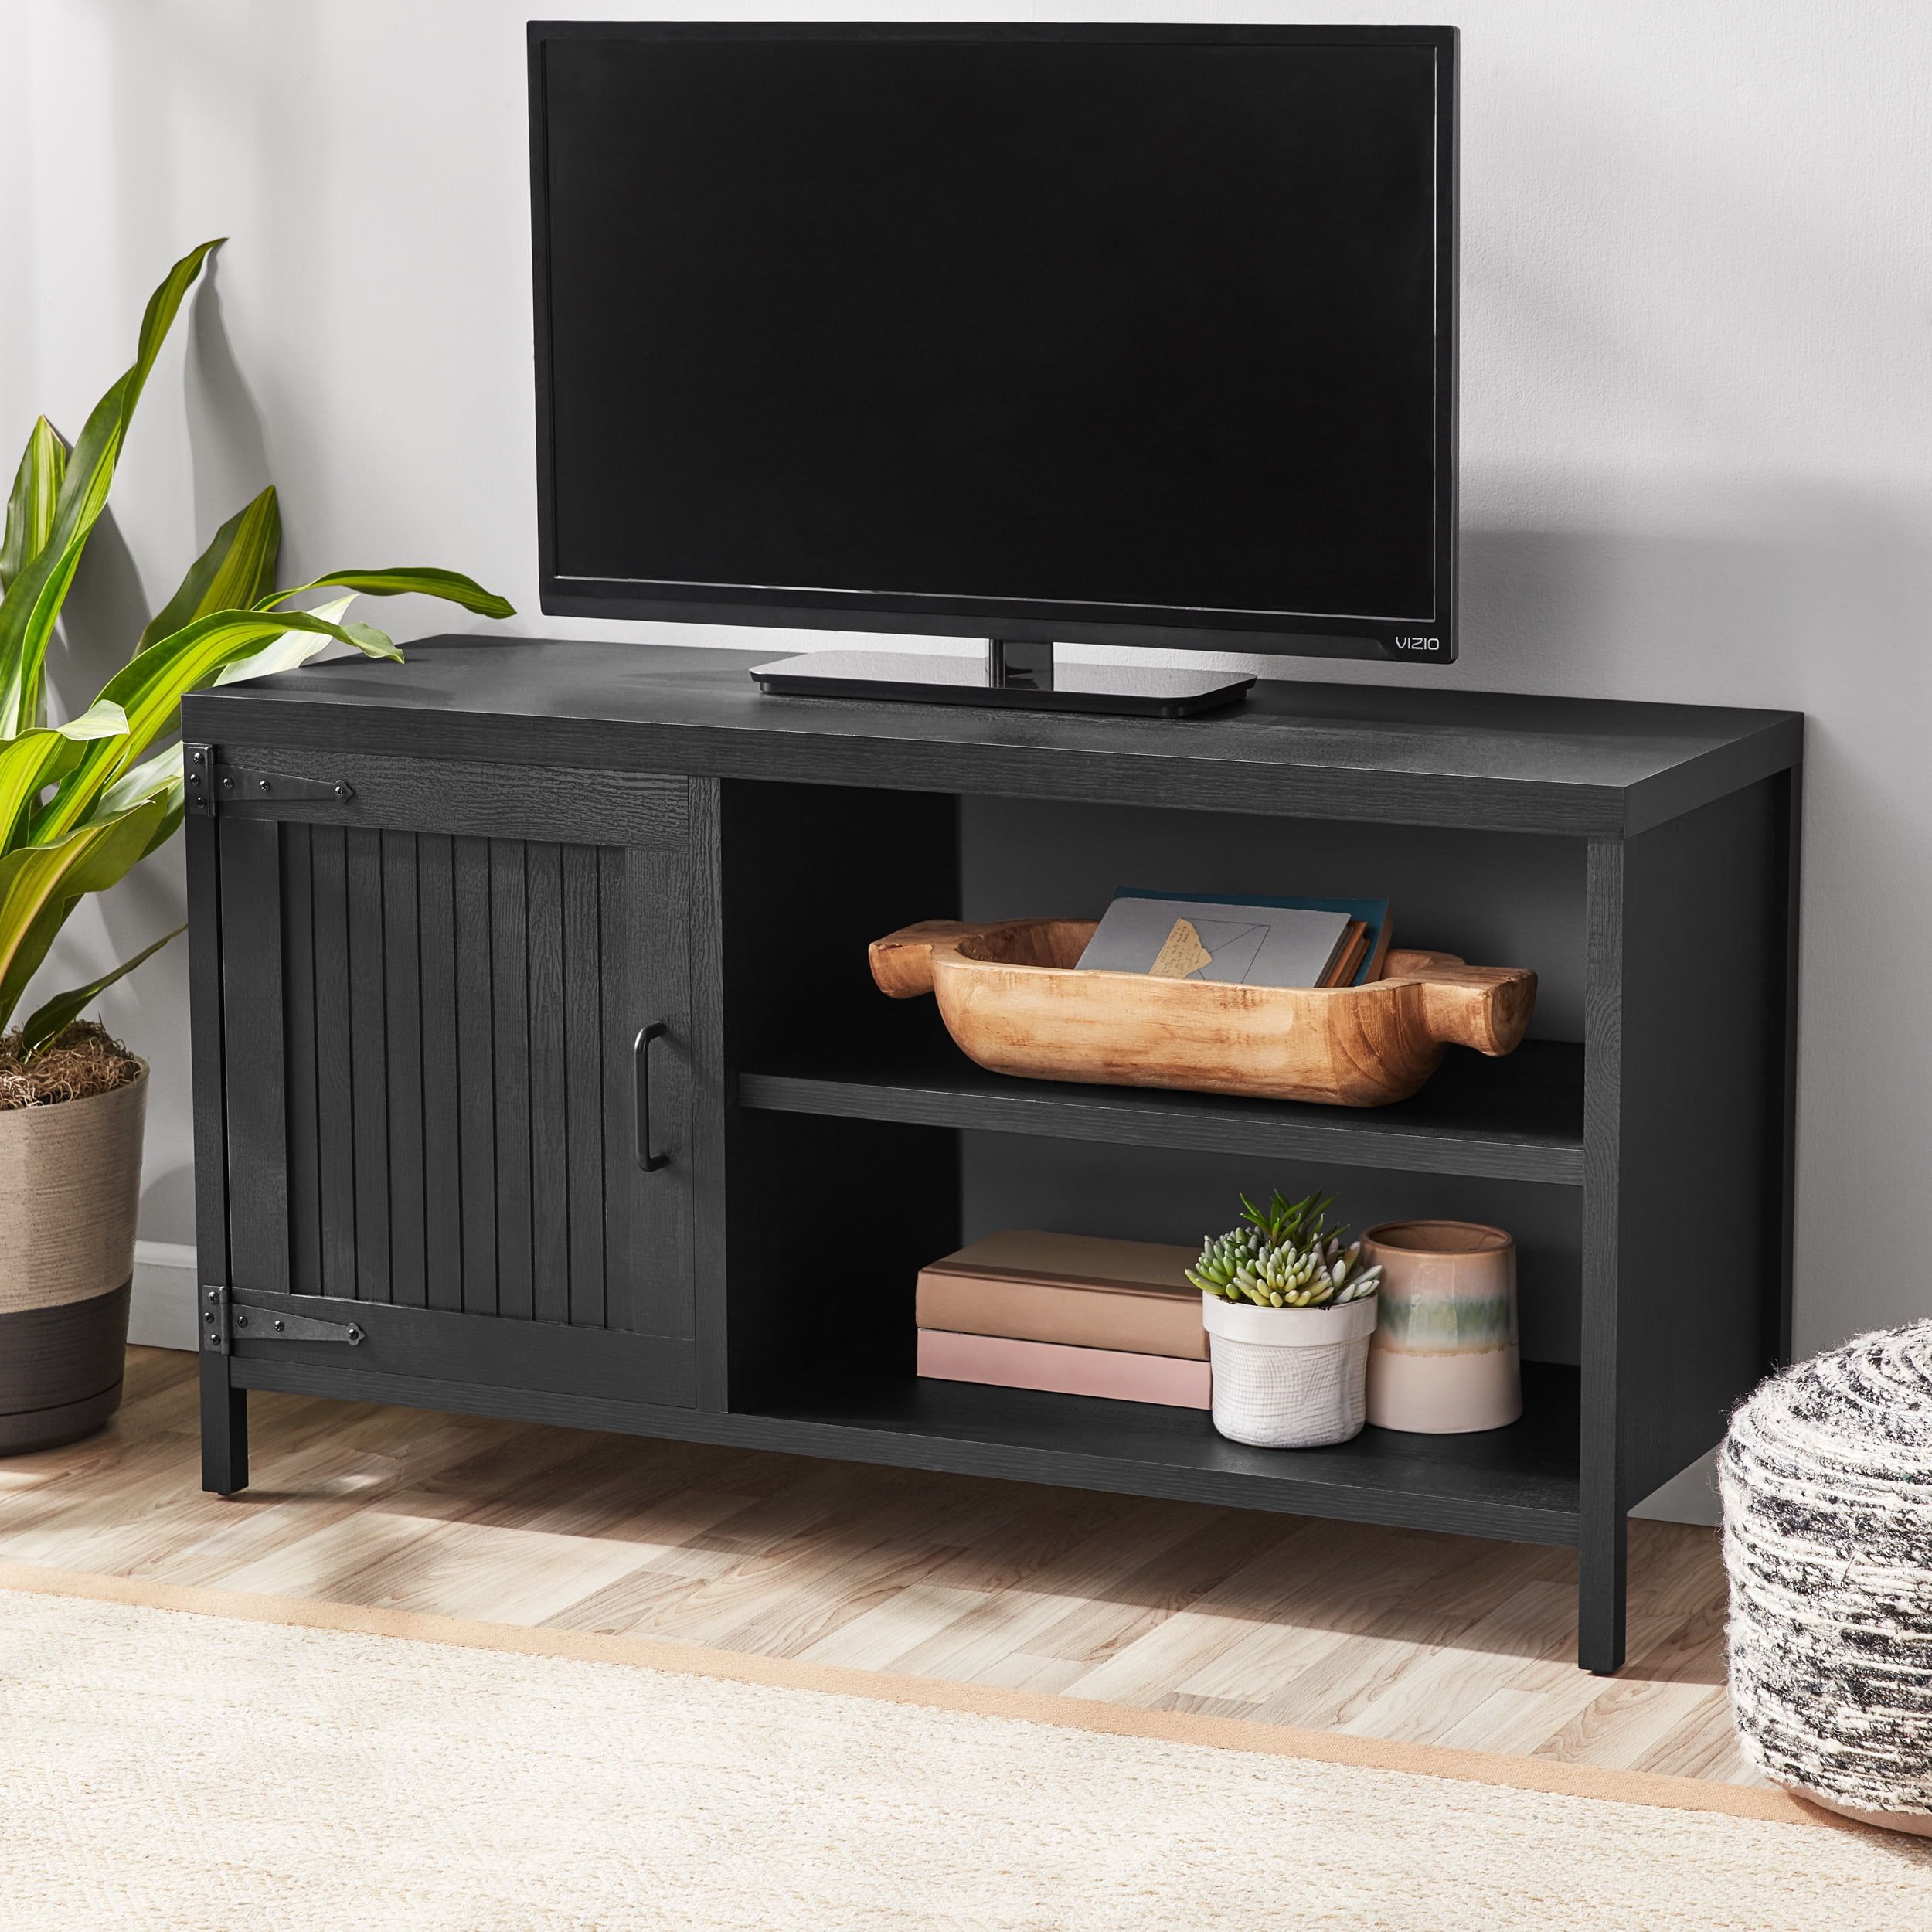 Mainstays Farmhouse Tv Stand For Tvs Up To 50", Black – Walmart For Farmhouse Stands For Tvs (Photo 9 of 15)